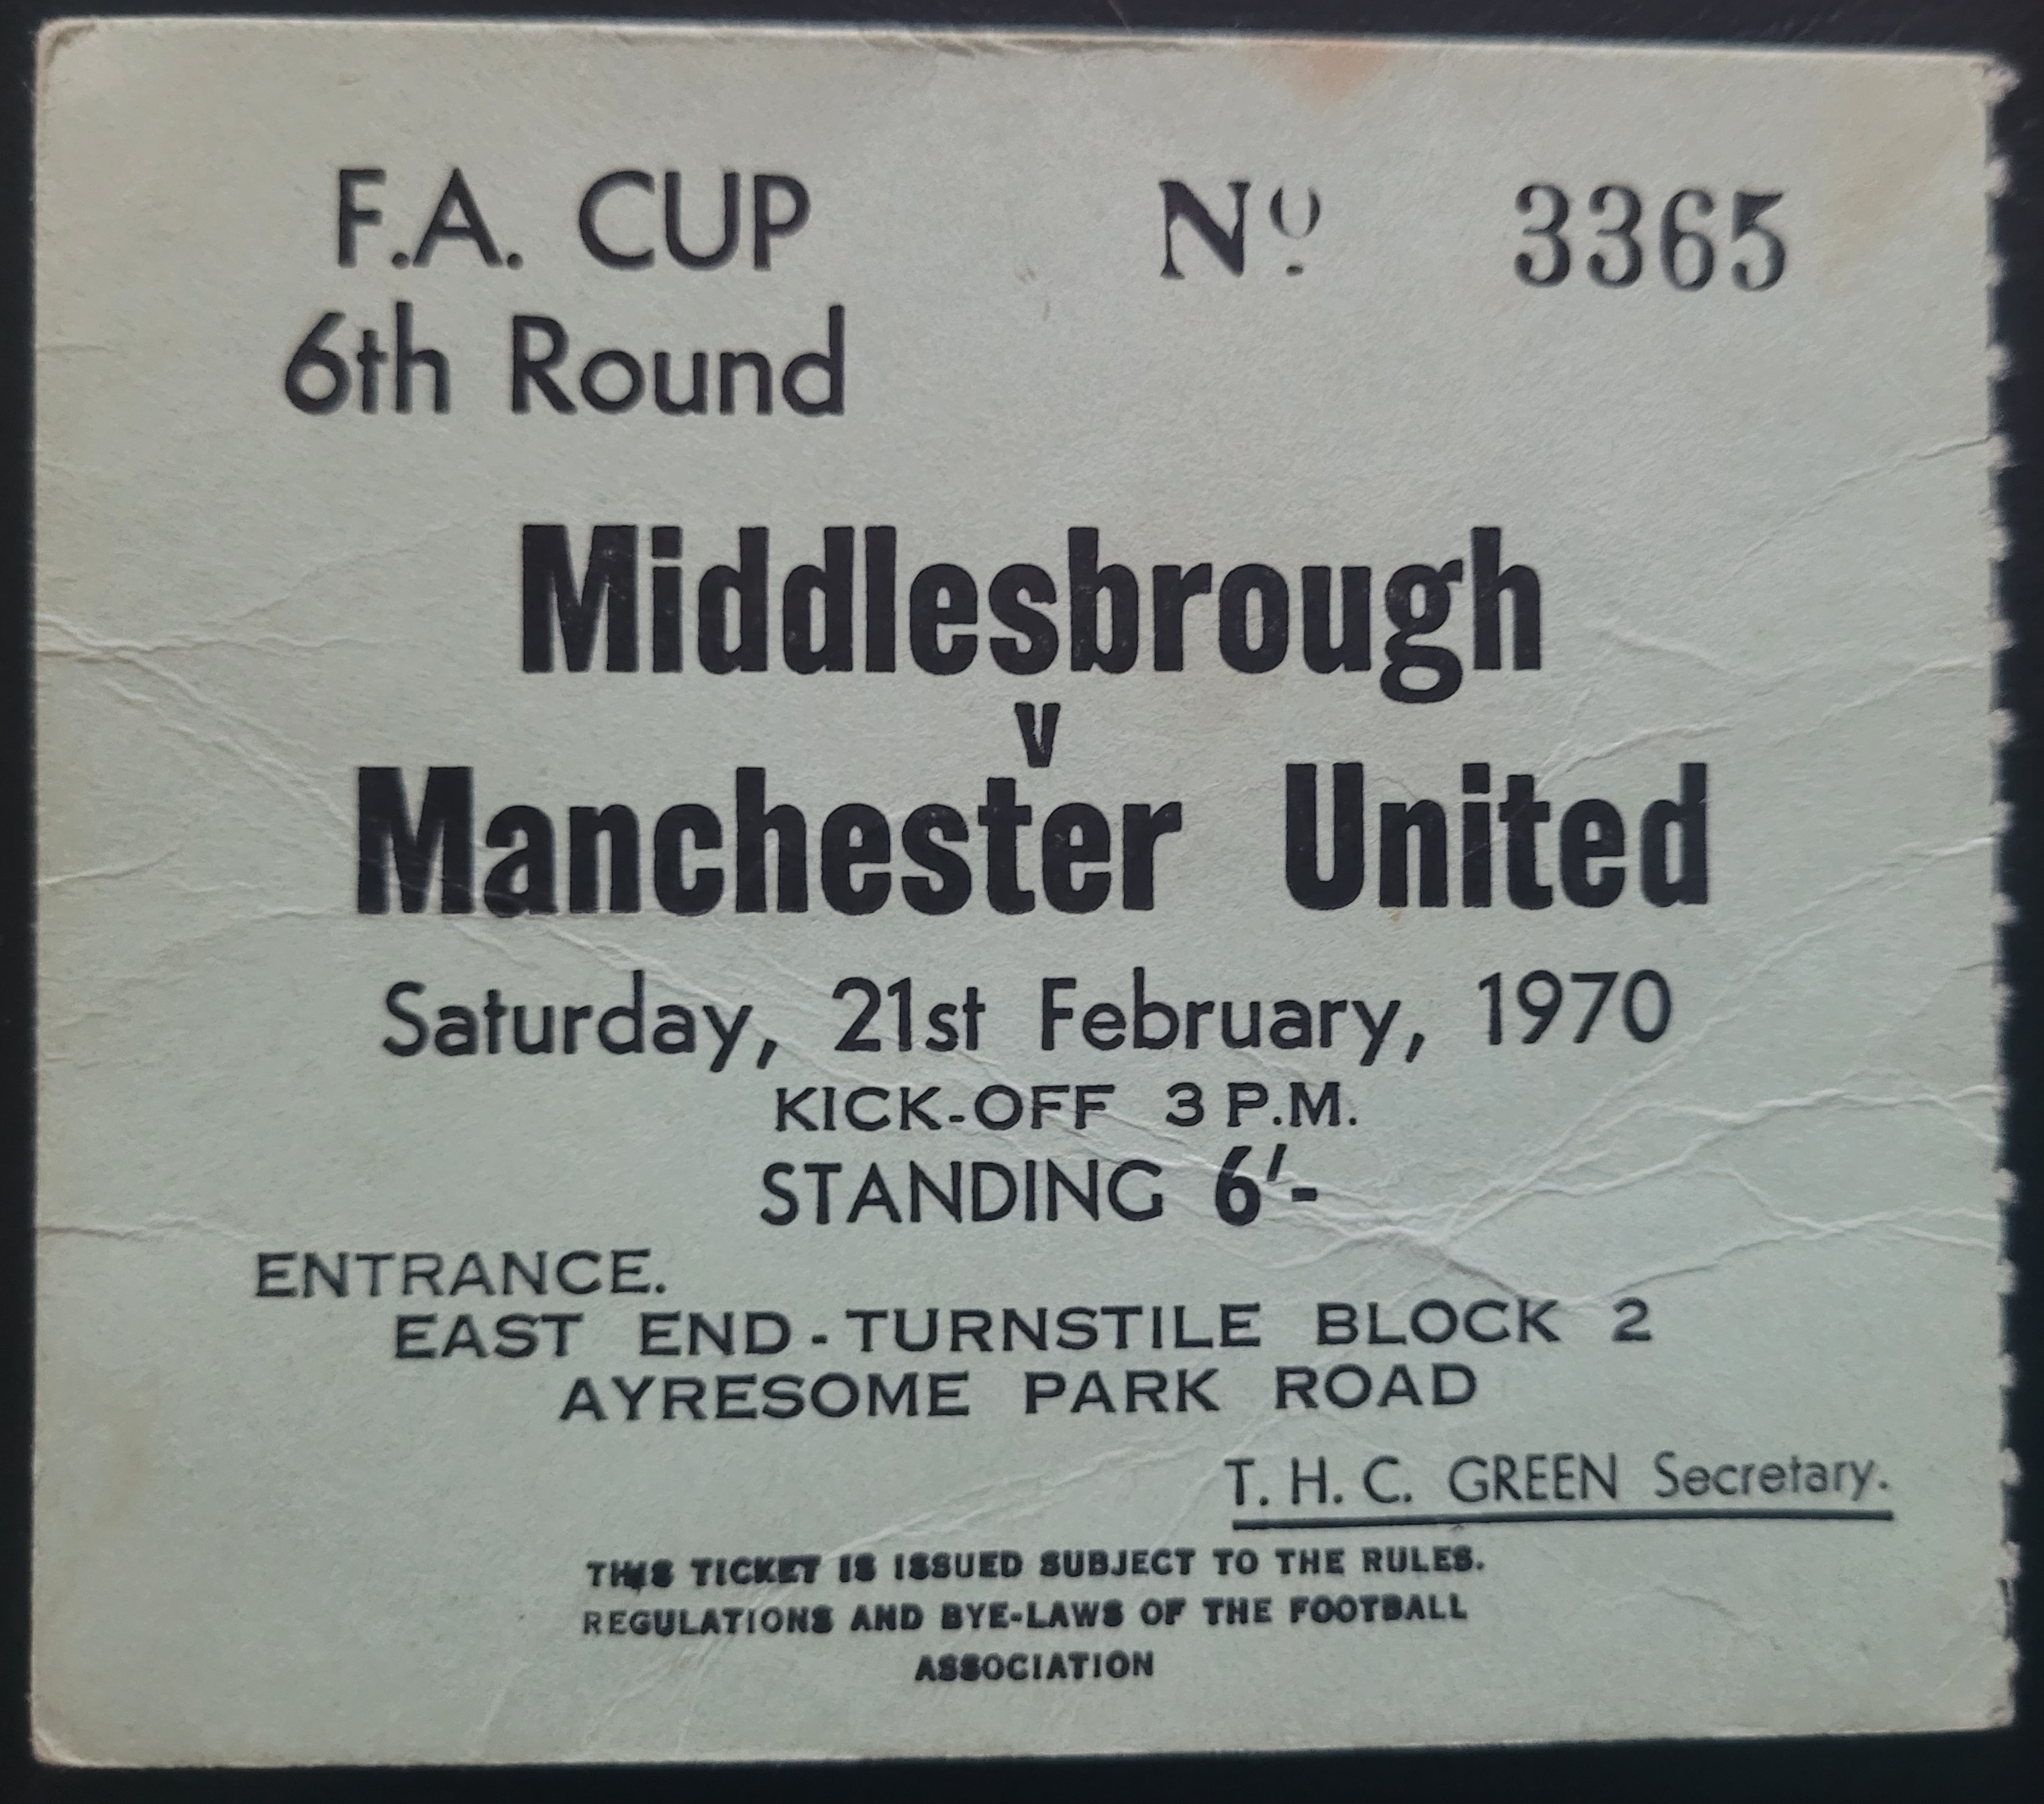 1969-70 MIDDLESBROUGH V MANCHESTER UNITED FA CUP 6TH ROUND TICKET